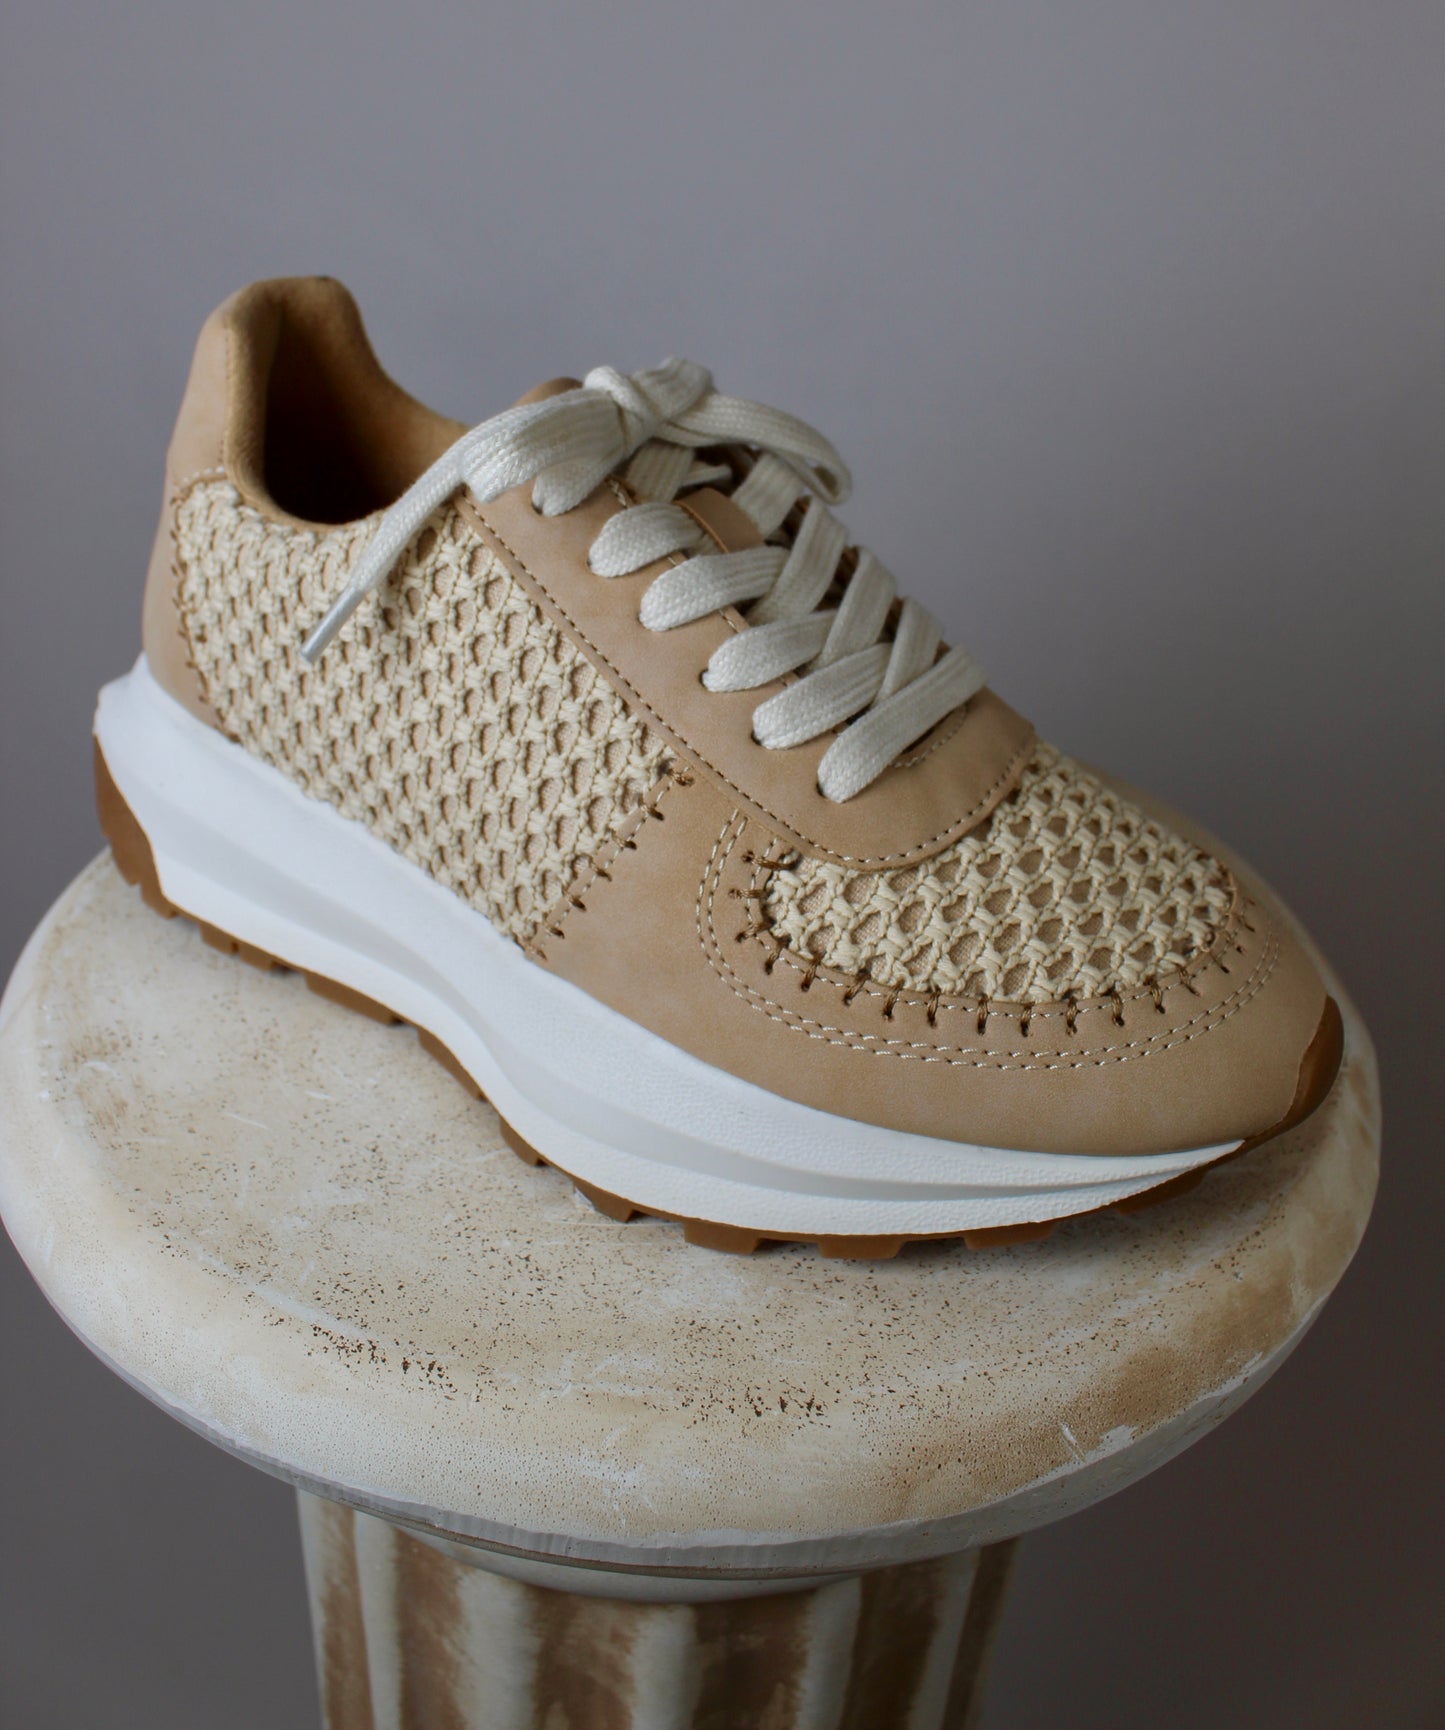 The Madison Sneaker